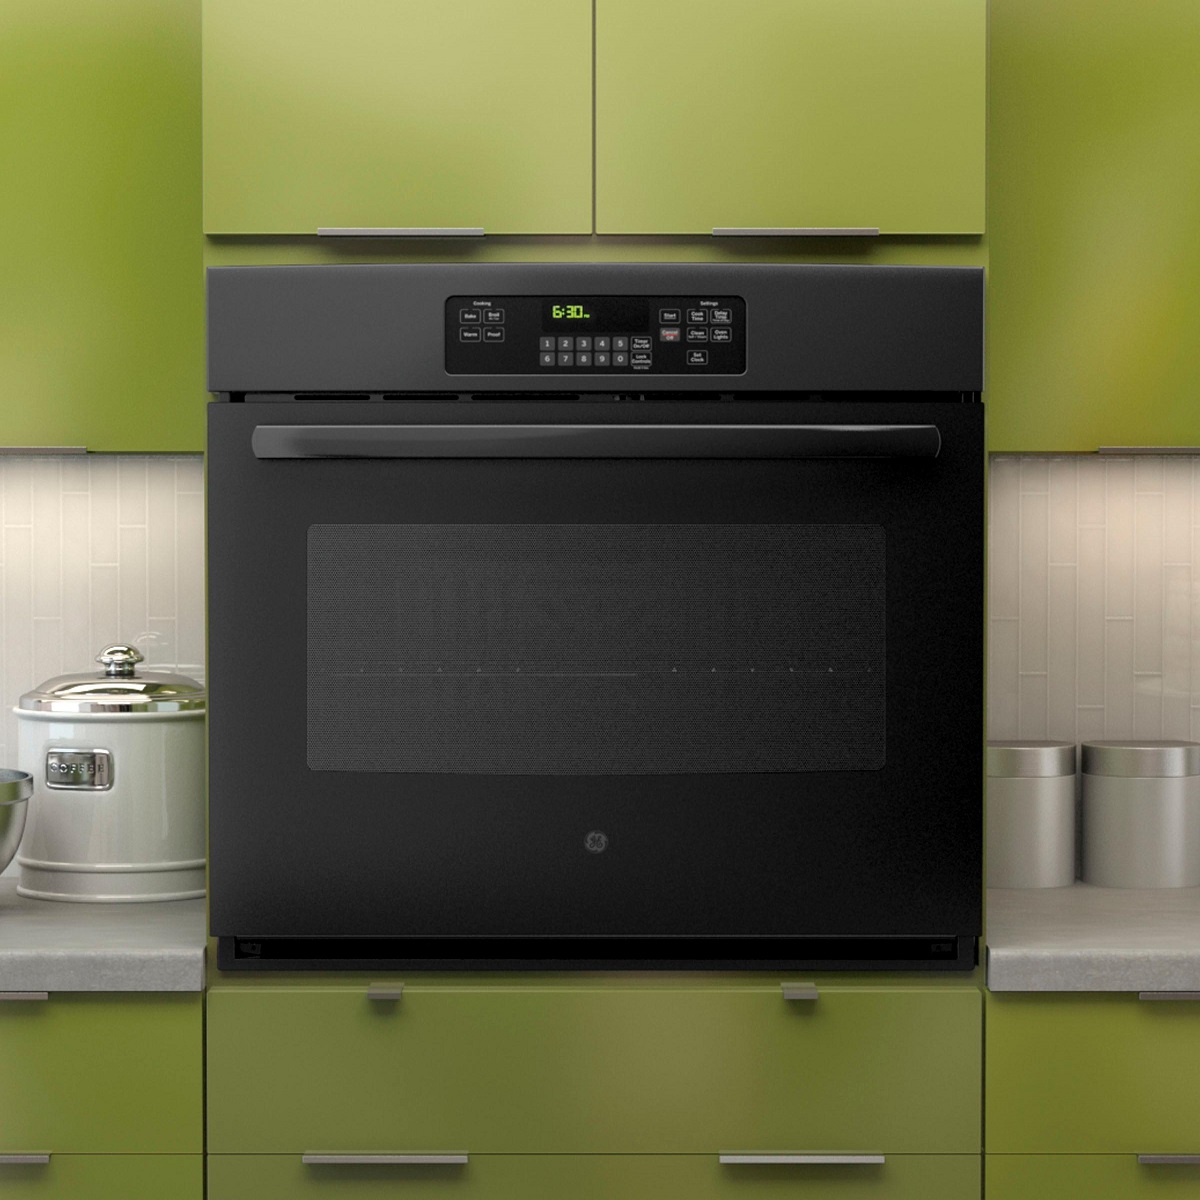 Professional 30 Wall Oven with Self Clean (AWS-30)